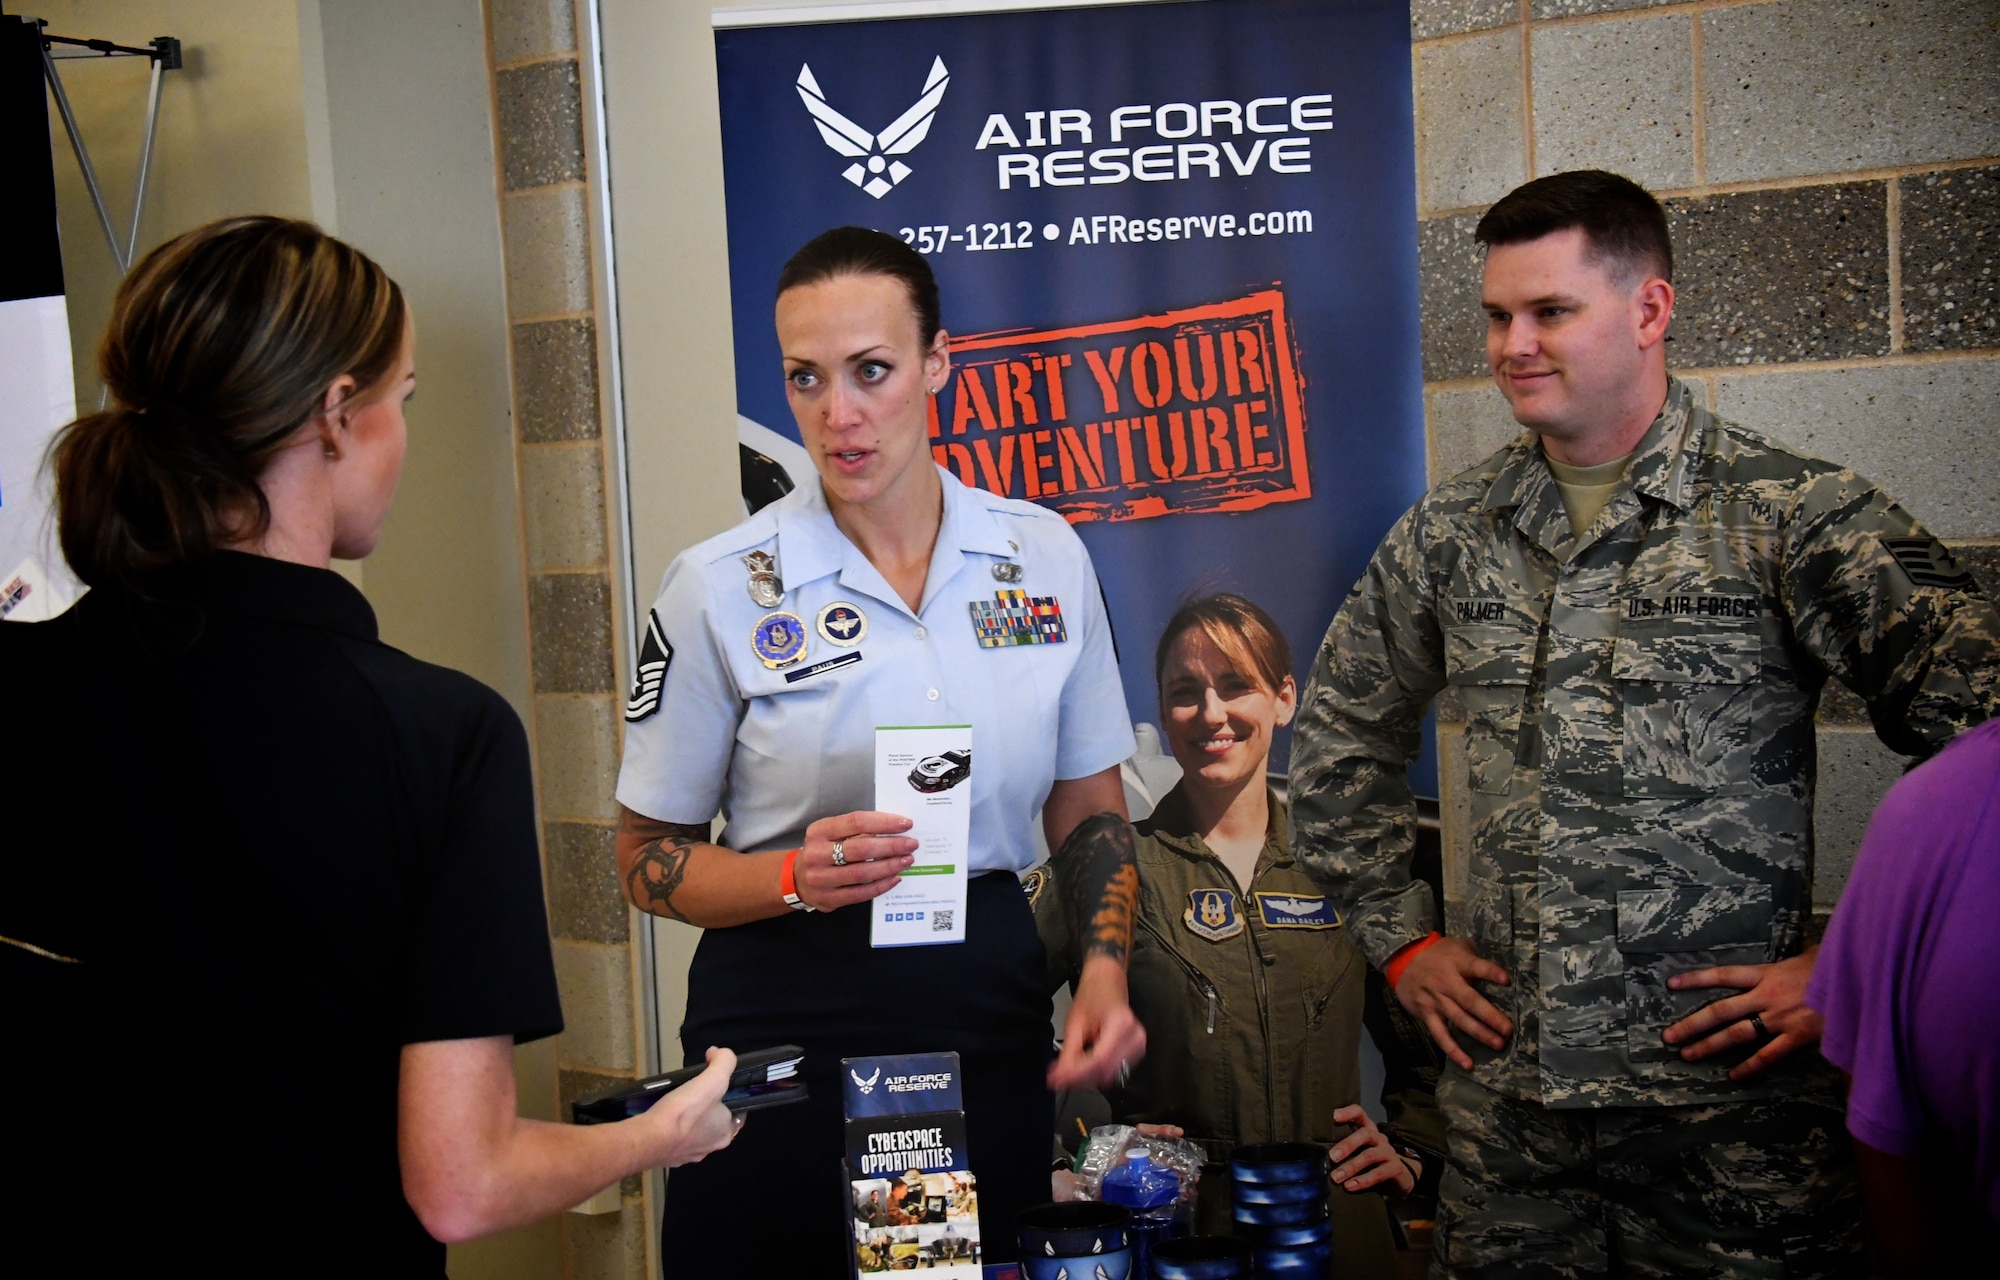 Recruiters Master Sgt. Brittany Paus and Staff Sgt. Justin Palmer along with public affairs staff from the 932nd Airlift Wing joined the Military Career Fair in Saint Louis on June 13, 2019. There were multiple employers from all types of career fields on hand to provide veterans with potential employment opportunities, including Citizen Airmen traditional reservist positions at the 932nd AW.  (U.S. Air Force photo by Lt. Col. Stan Paregien)